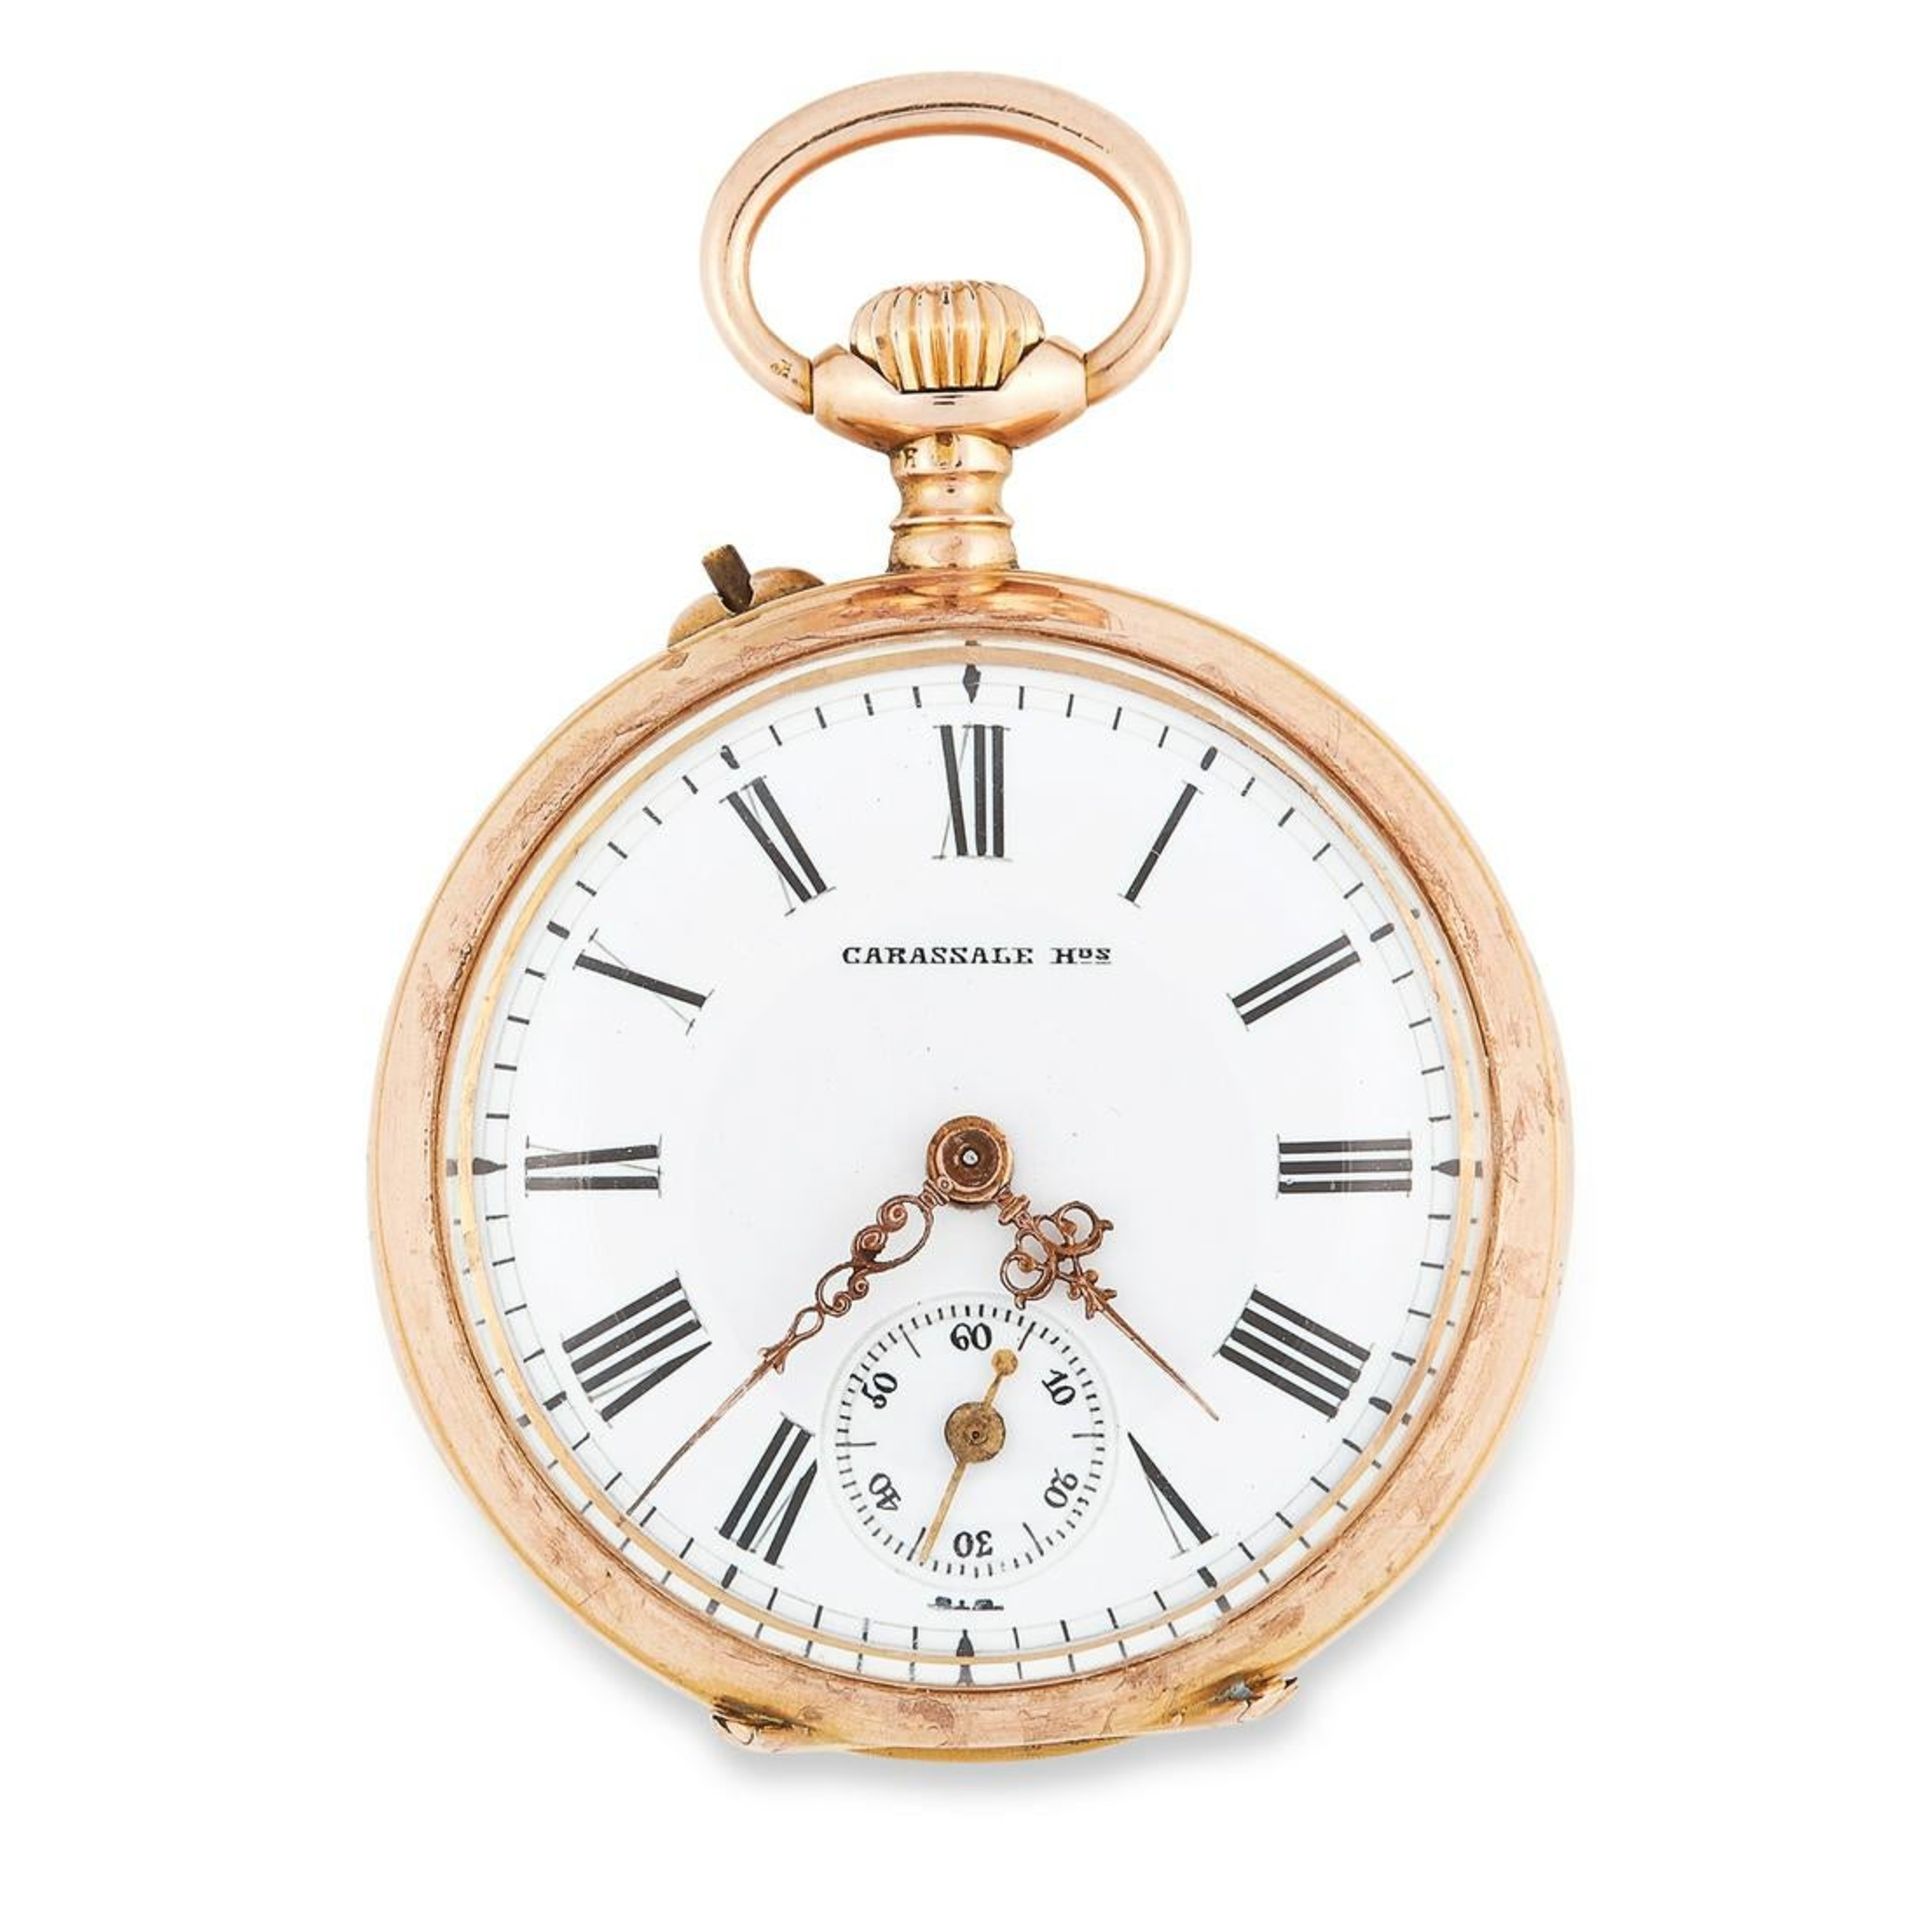 AN ANTIQUE ENAMEL AND DIAMOND POCKET WATCH in 18ct yellow gold, set with rose cut diamonds and